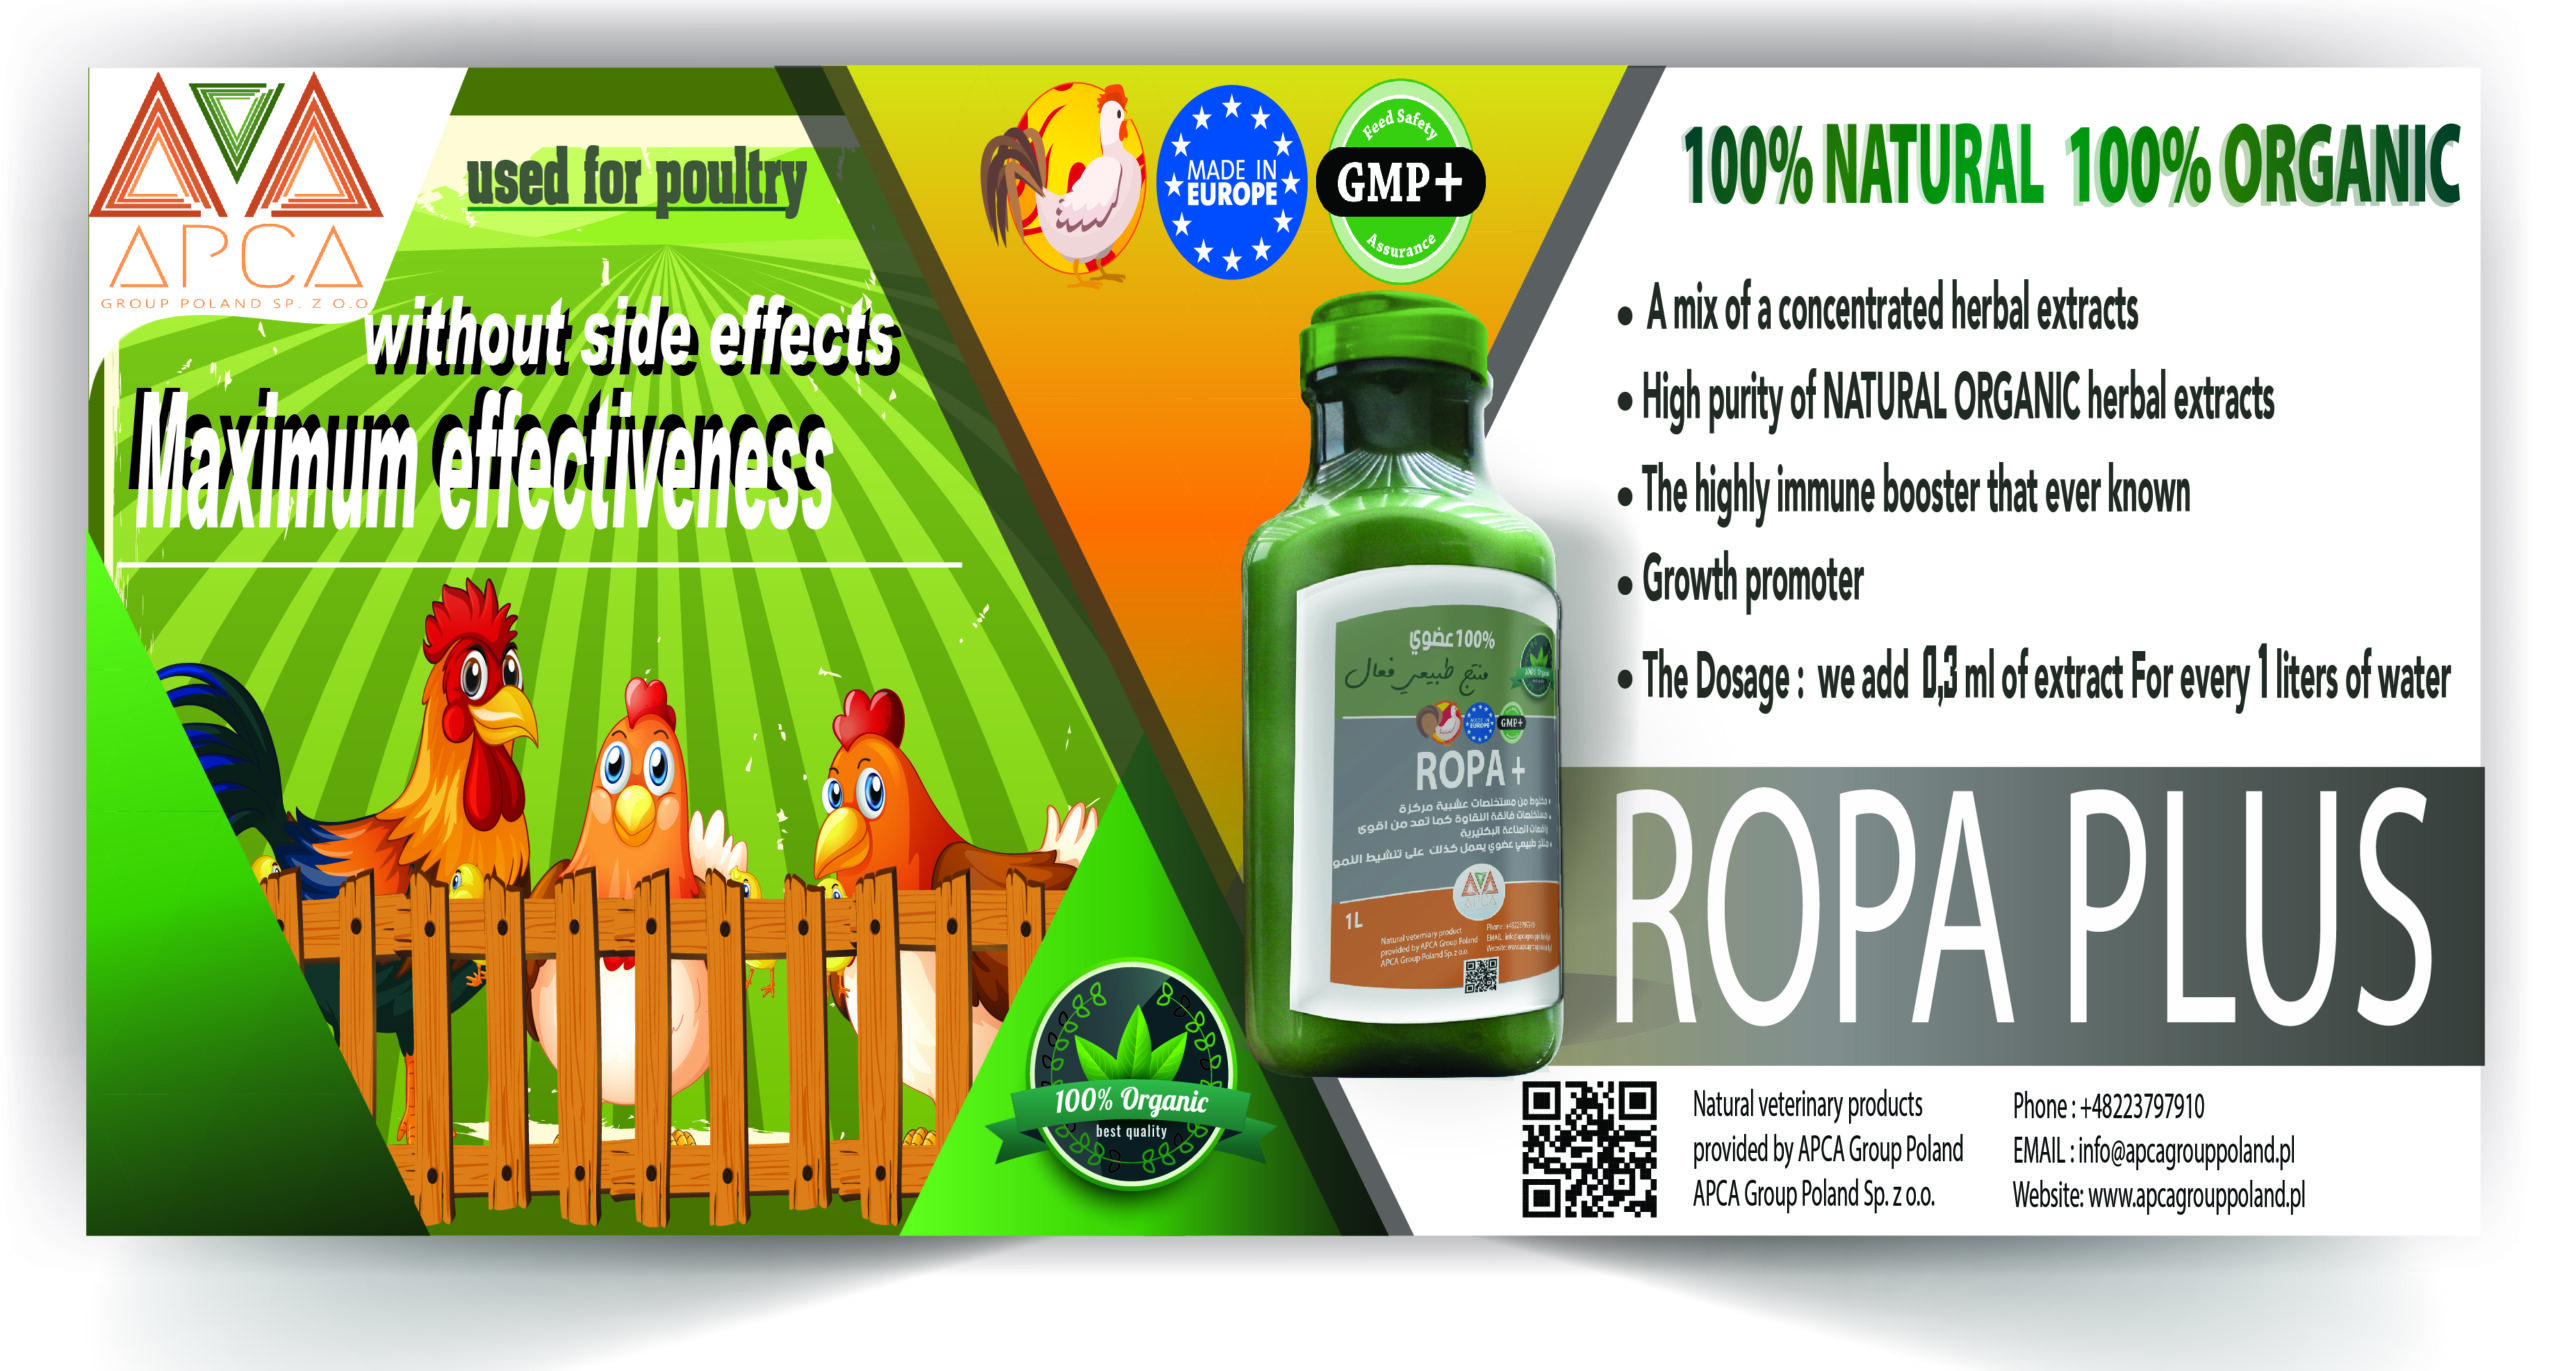 apca group poland -- export veterinary products -- ropa plus